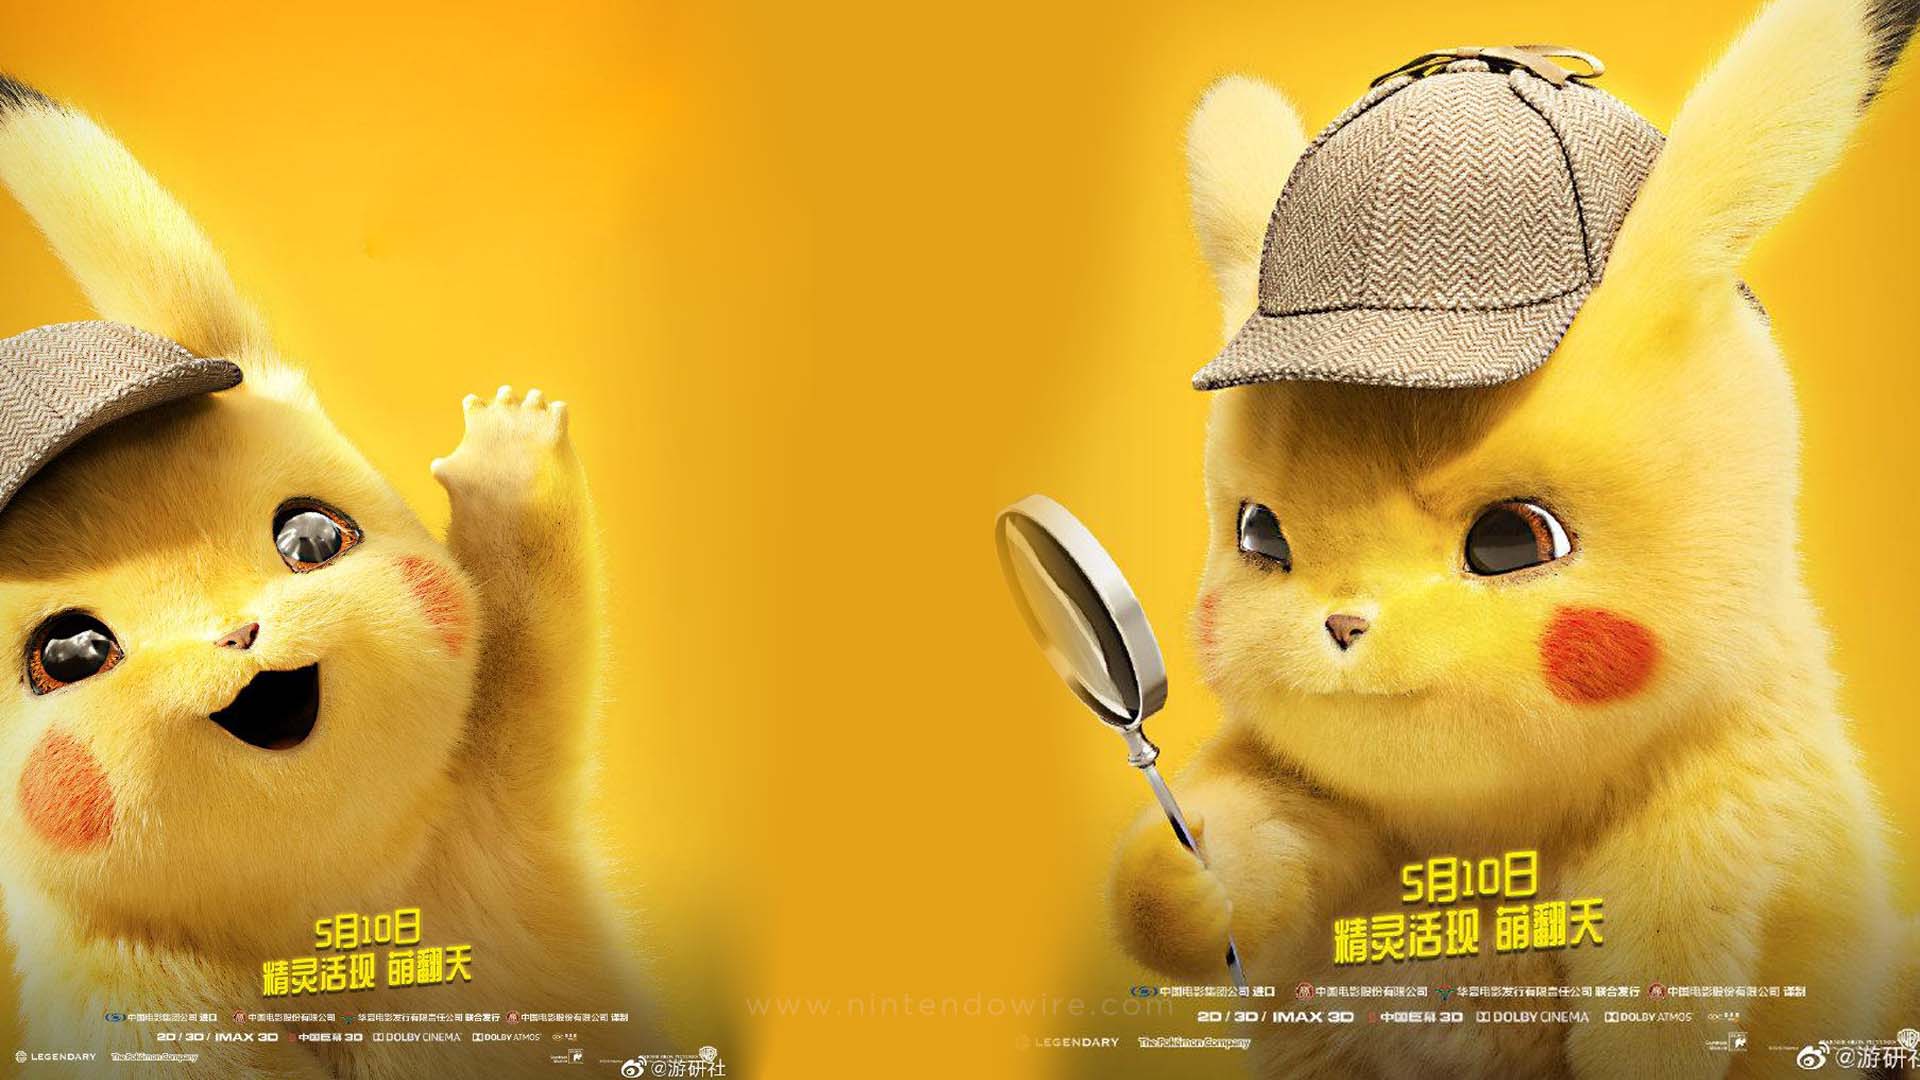 New Detective Pikachu posters and video emerge in China - Nintendo Wire.